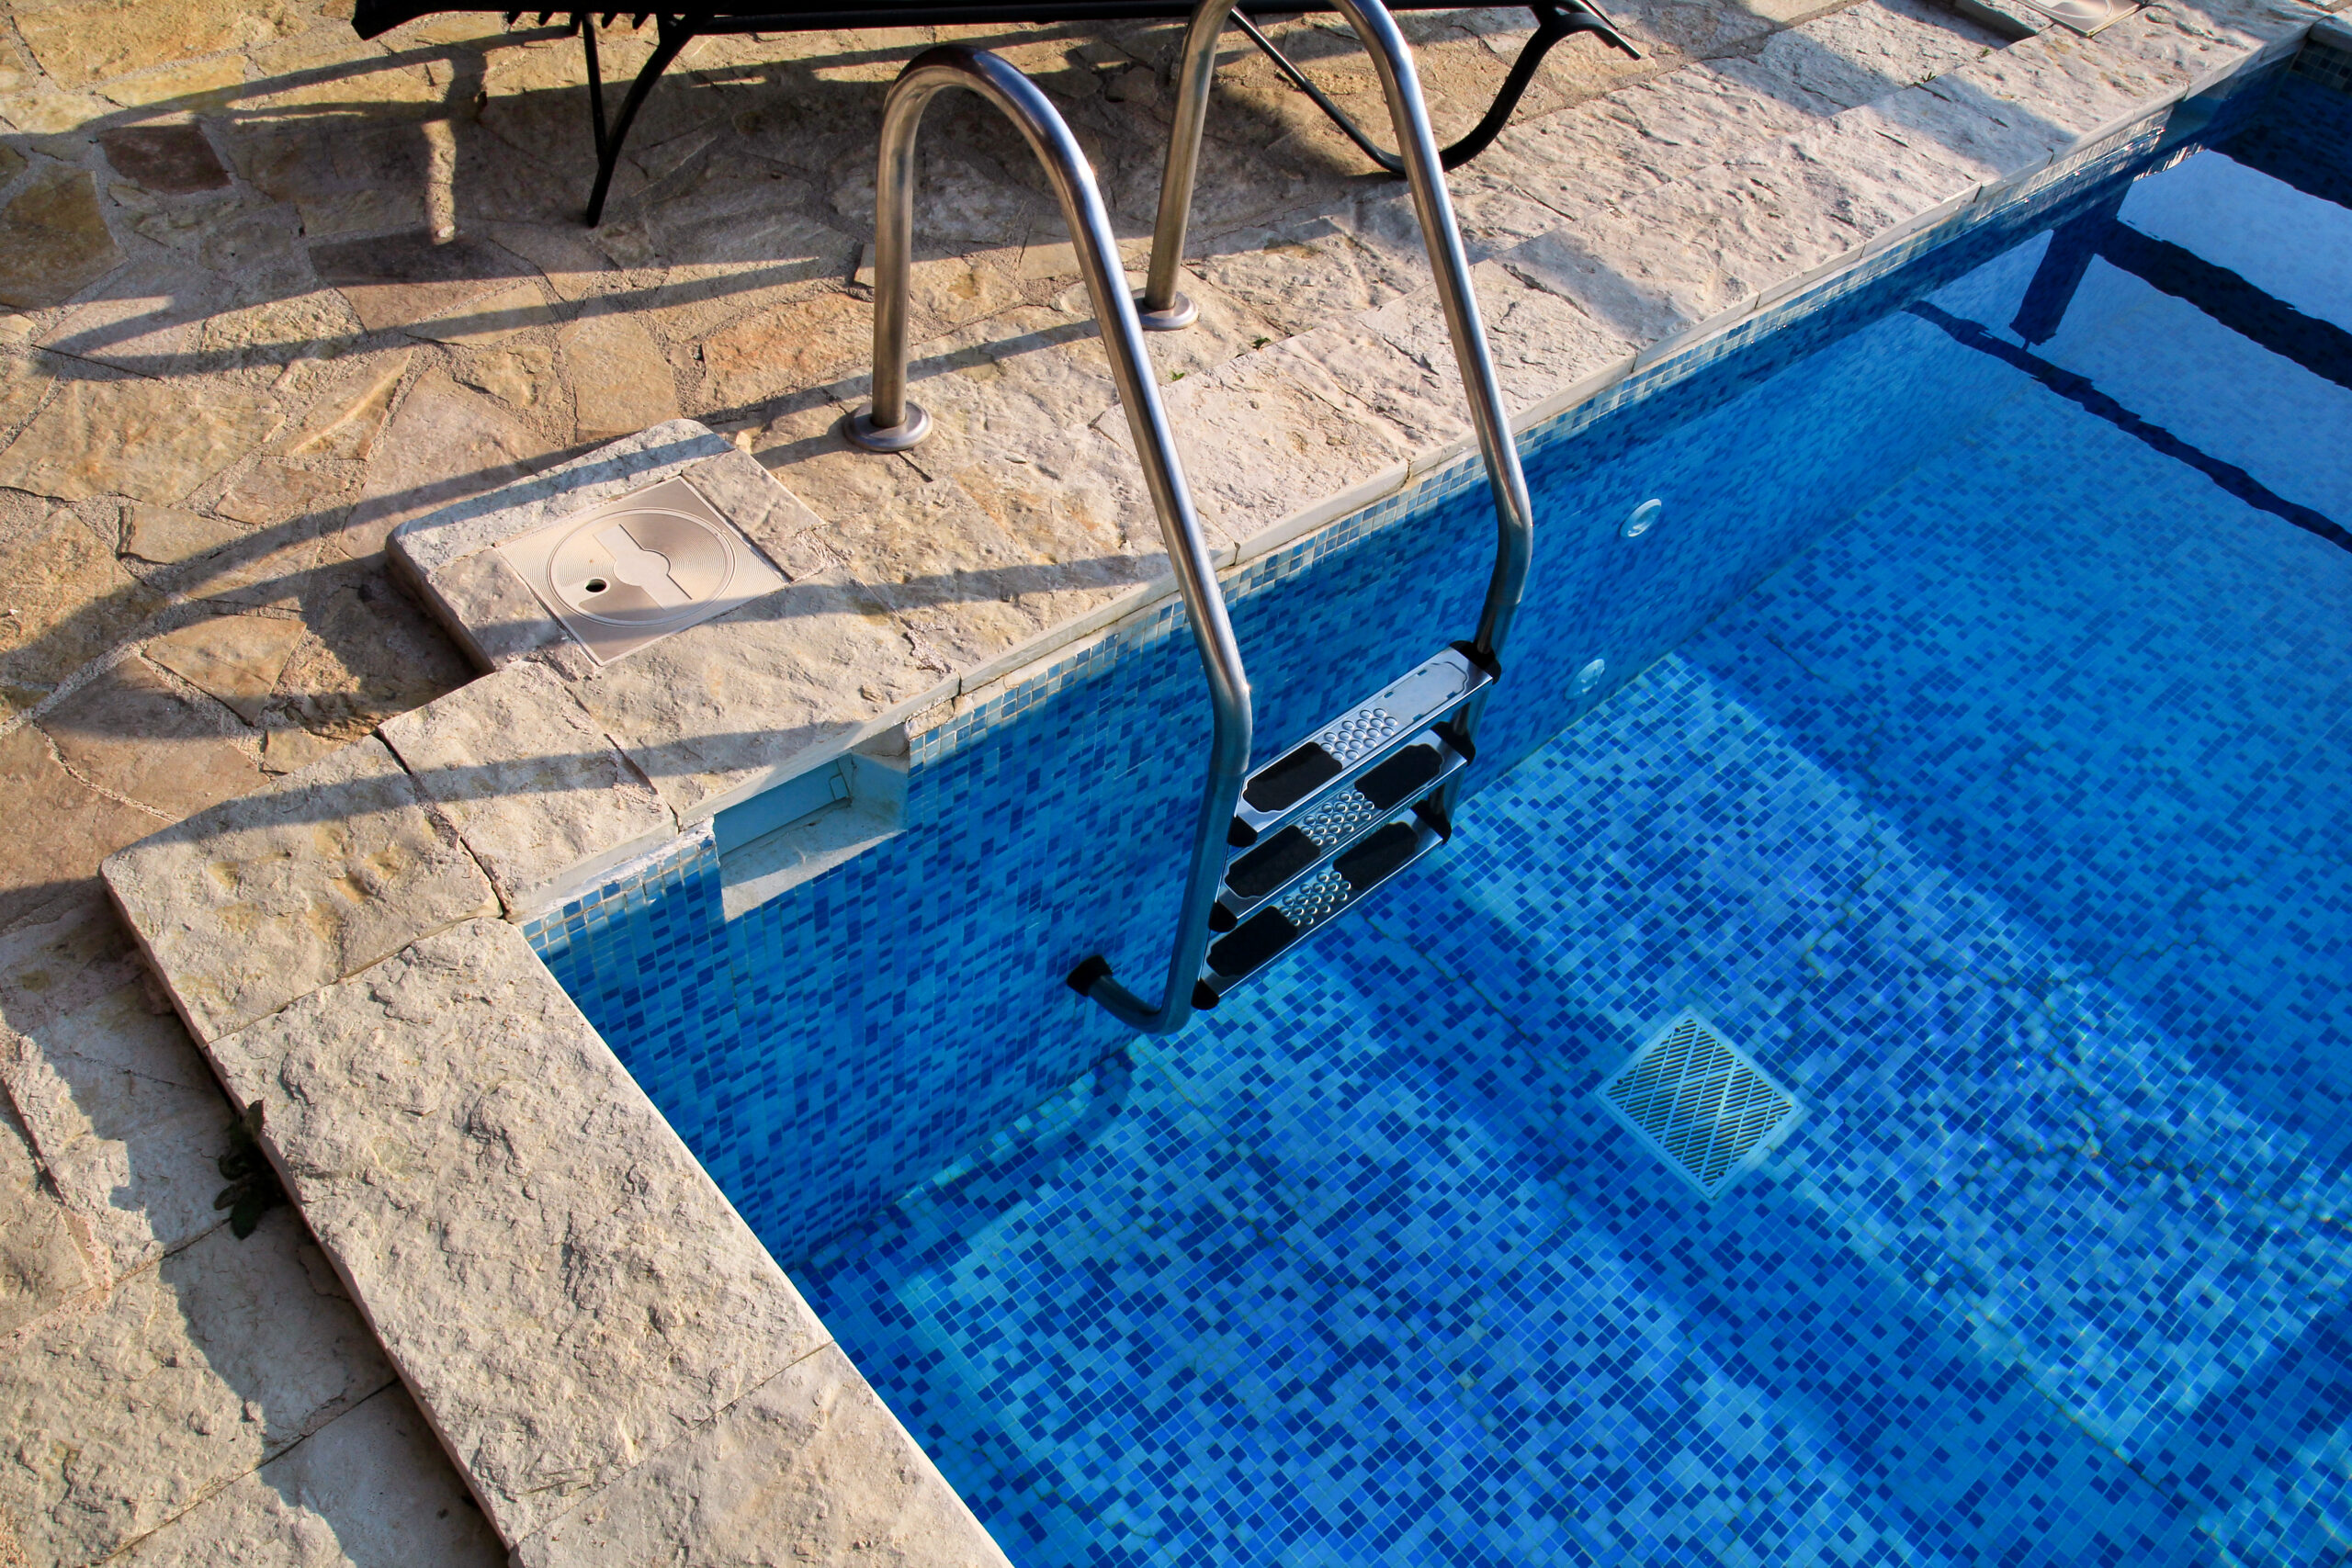 Pool rails, also known as handrails or grab rails, installed along the pool's edge or steps for safety and support when entering, exiting, or moving around the pool.